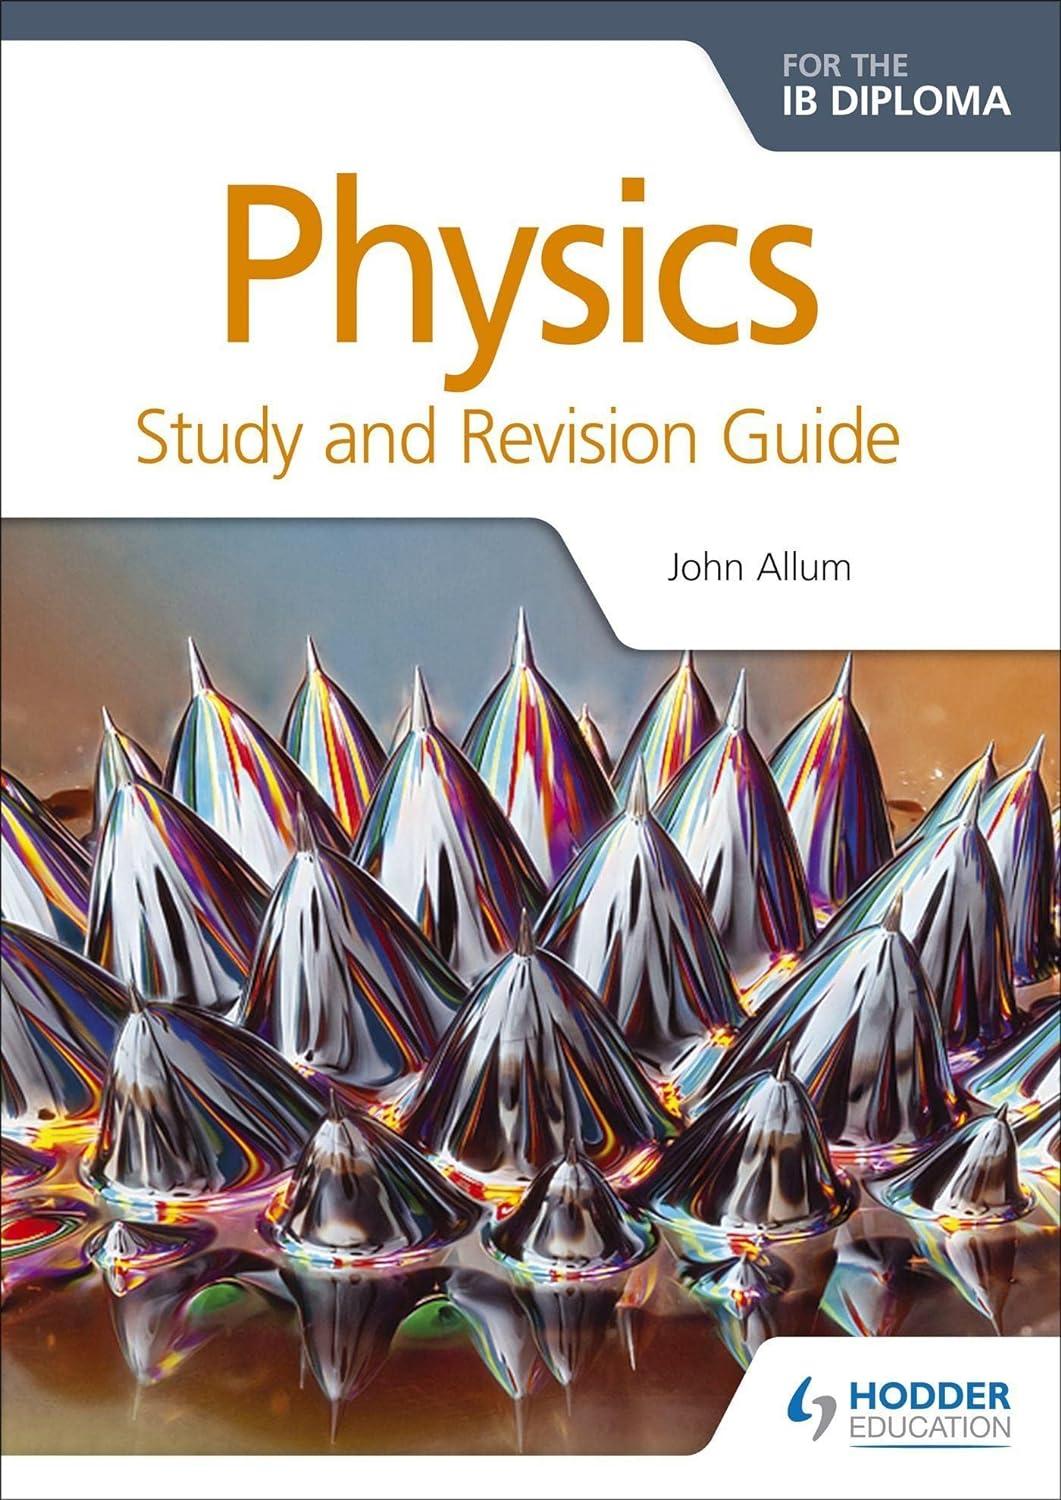 physics for the ib diploma study and revision guide 1st edition john allum 1471899721, 978-1471899720